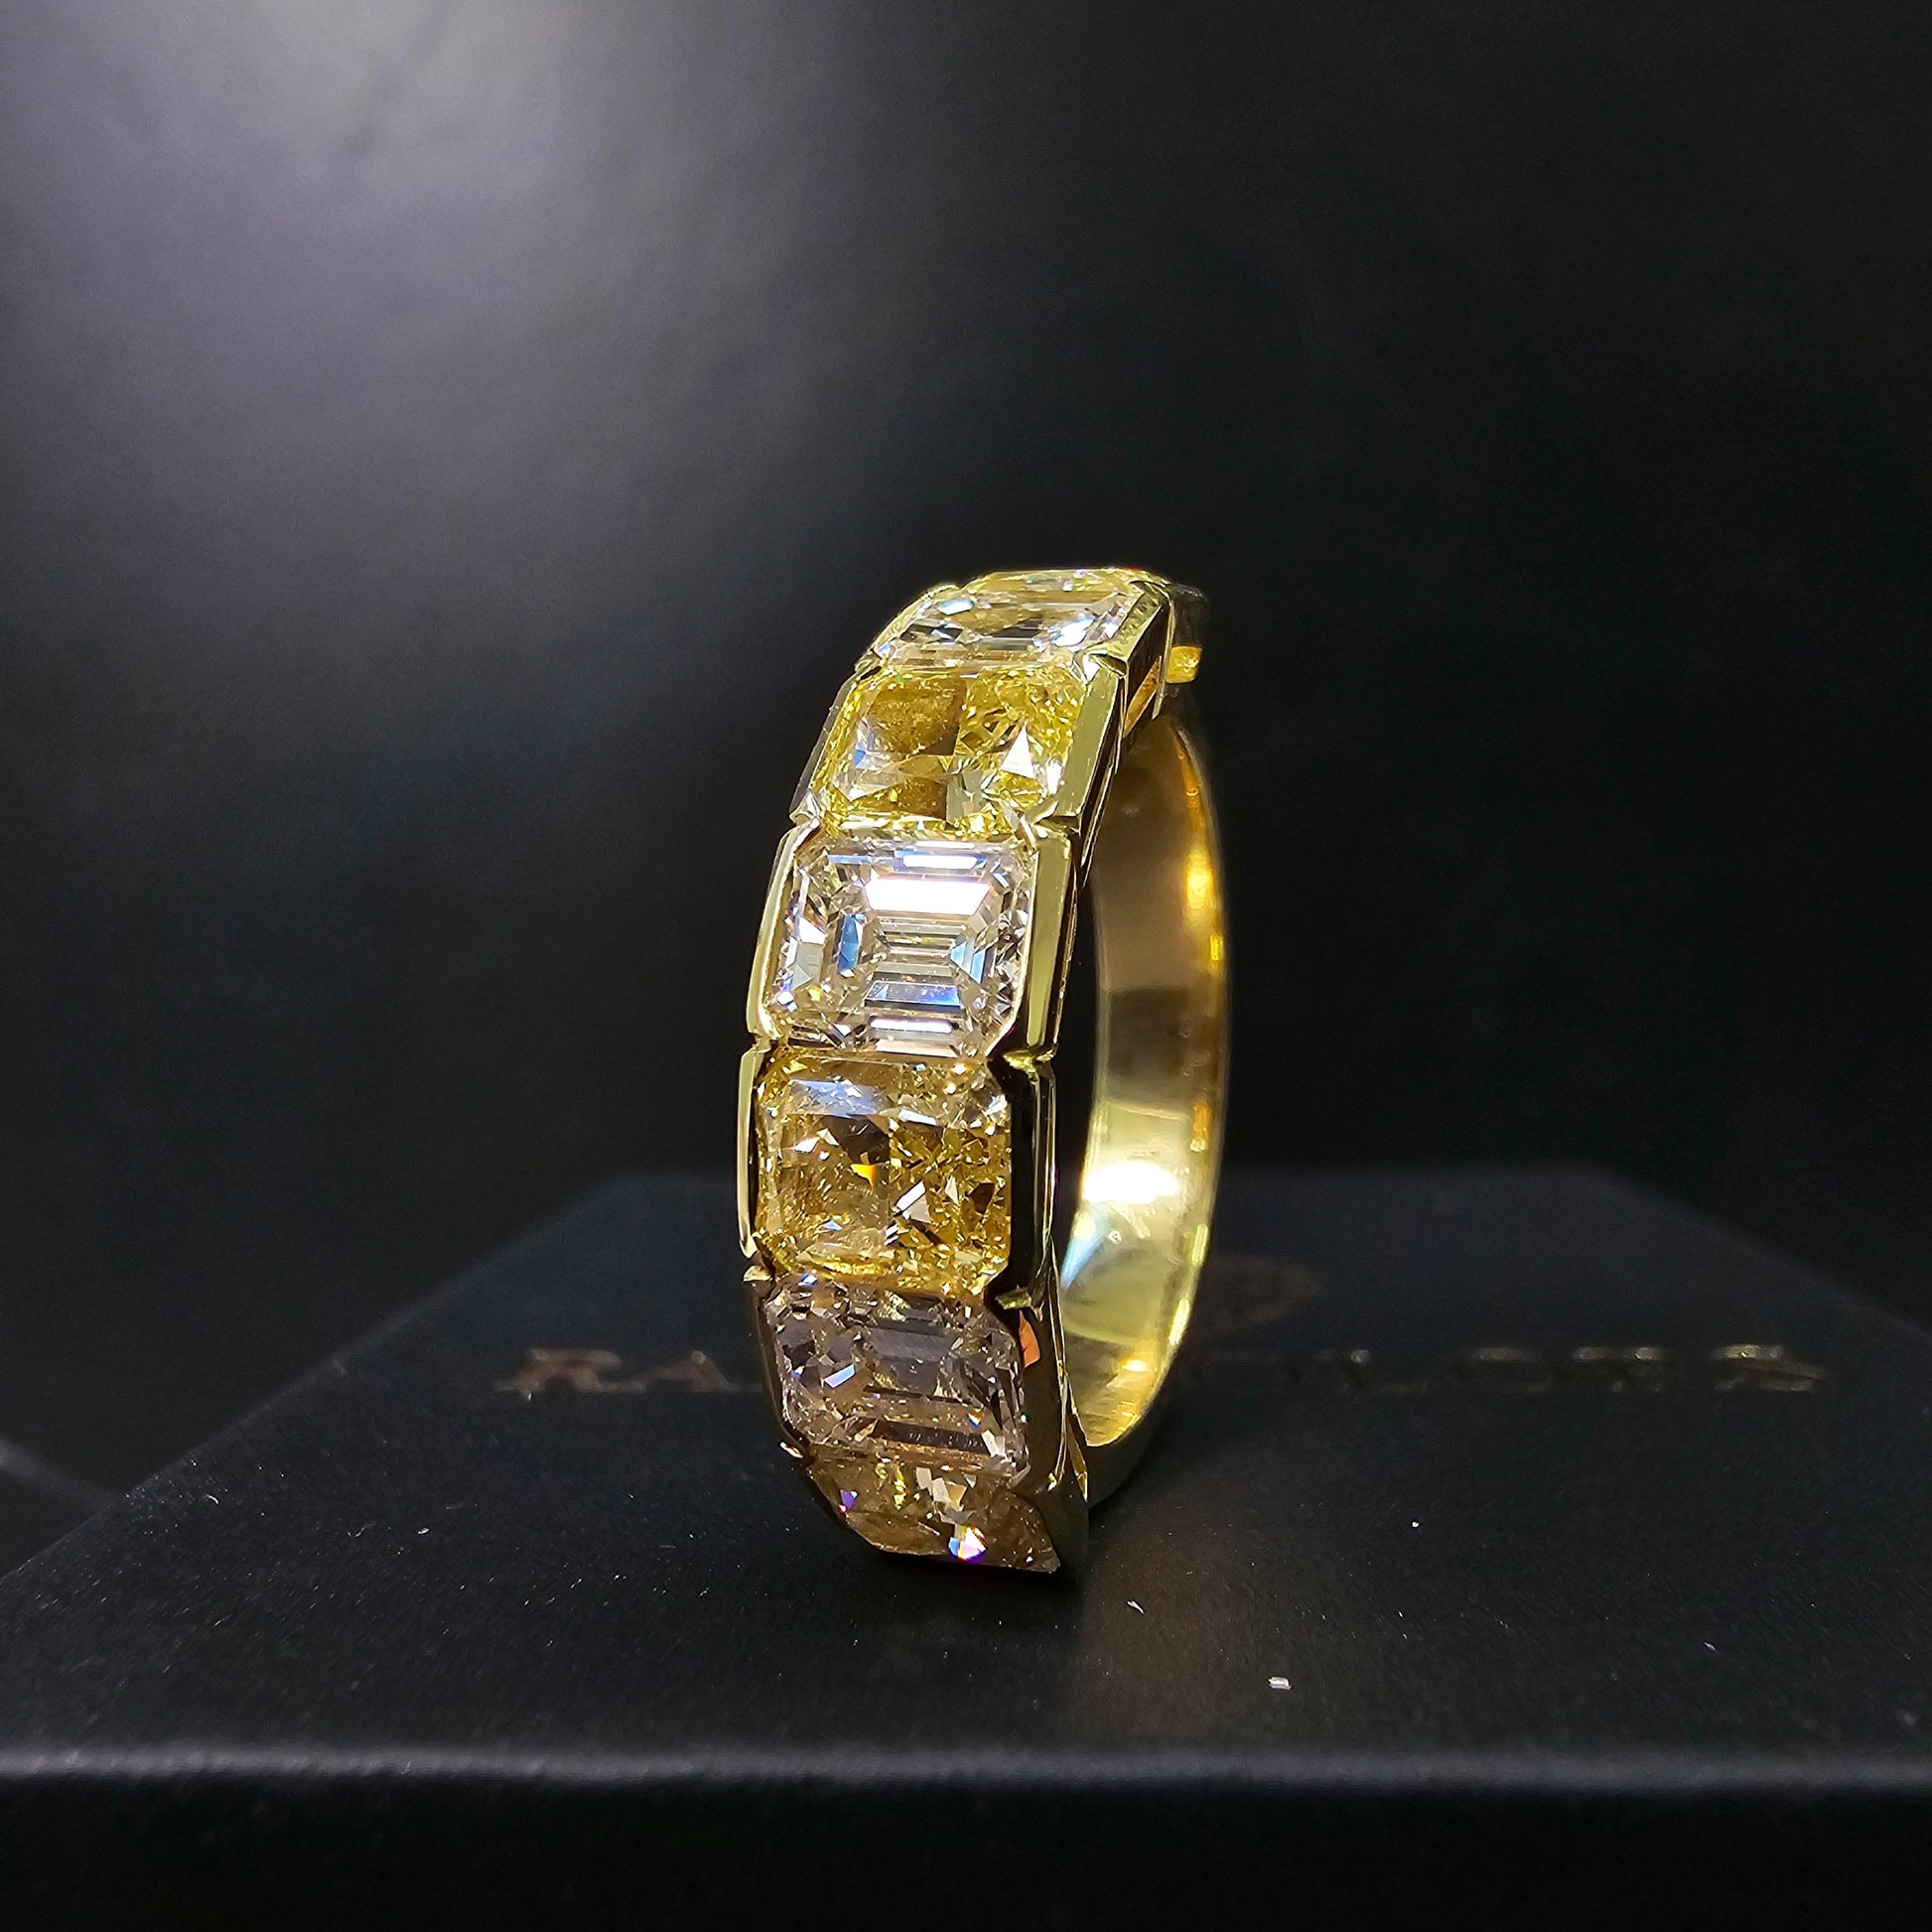 An alternating yellow diamond and white diamond half eternity band, a twist on the classic eternity with diamonds reaching only halfway across the band